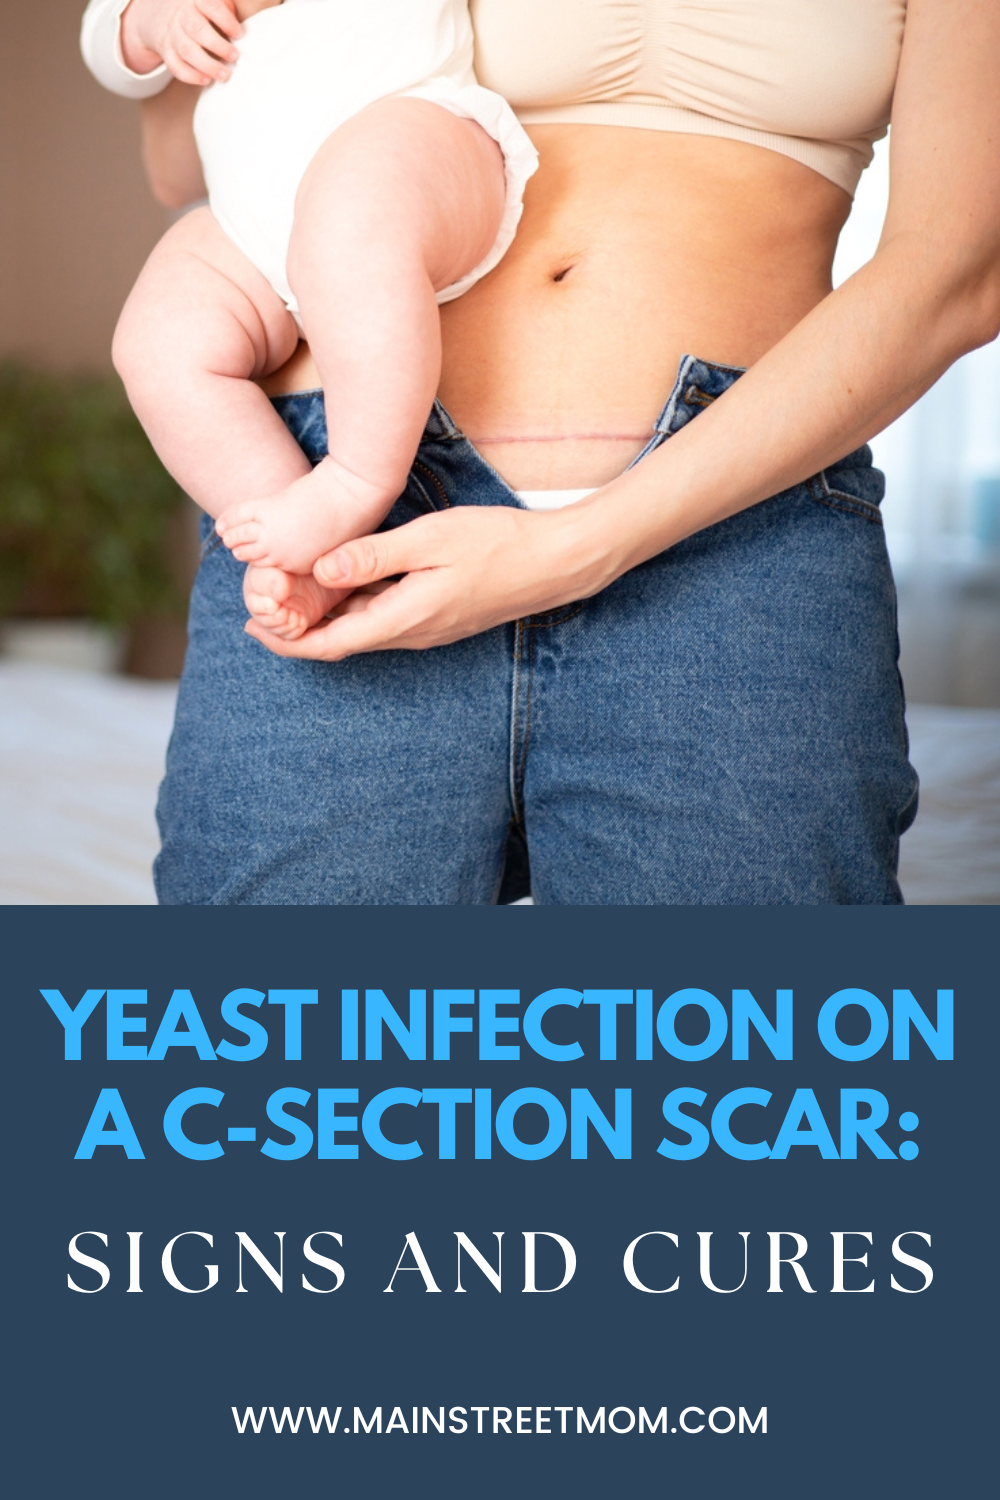 Yeast Infection On A C-Section Scar Signs And Cures